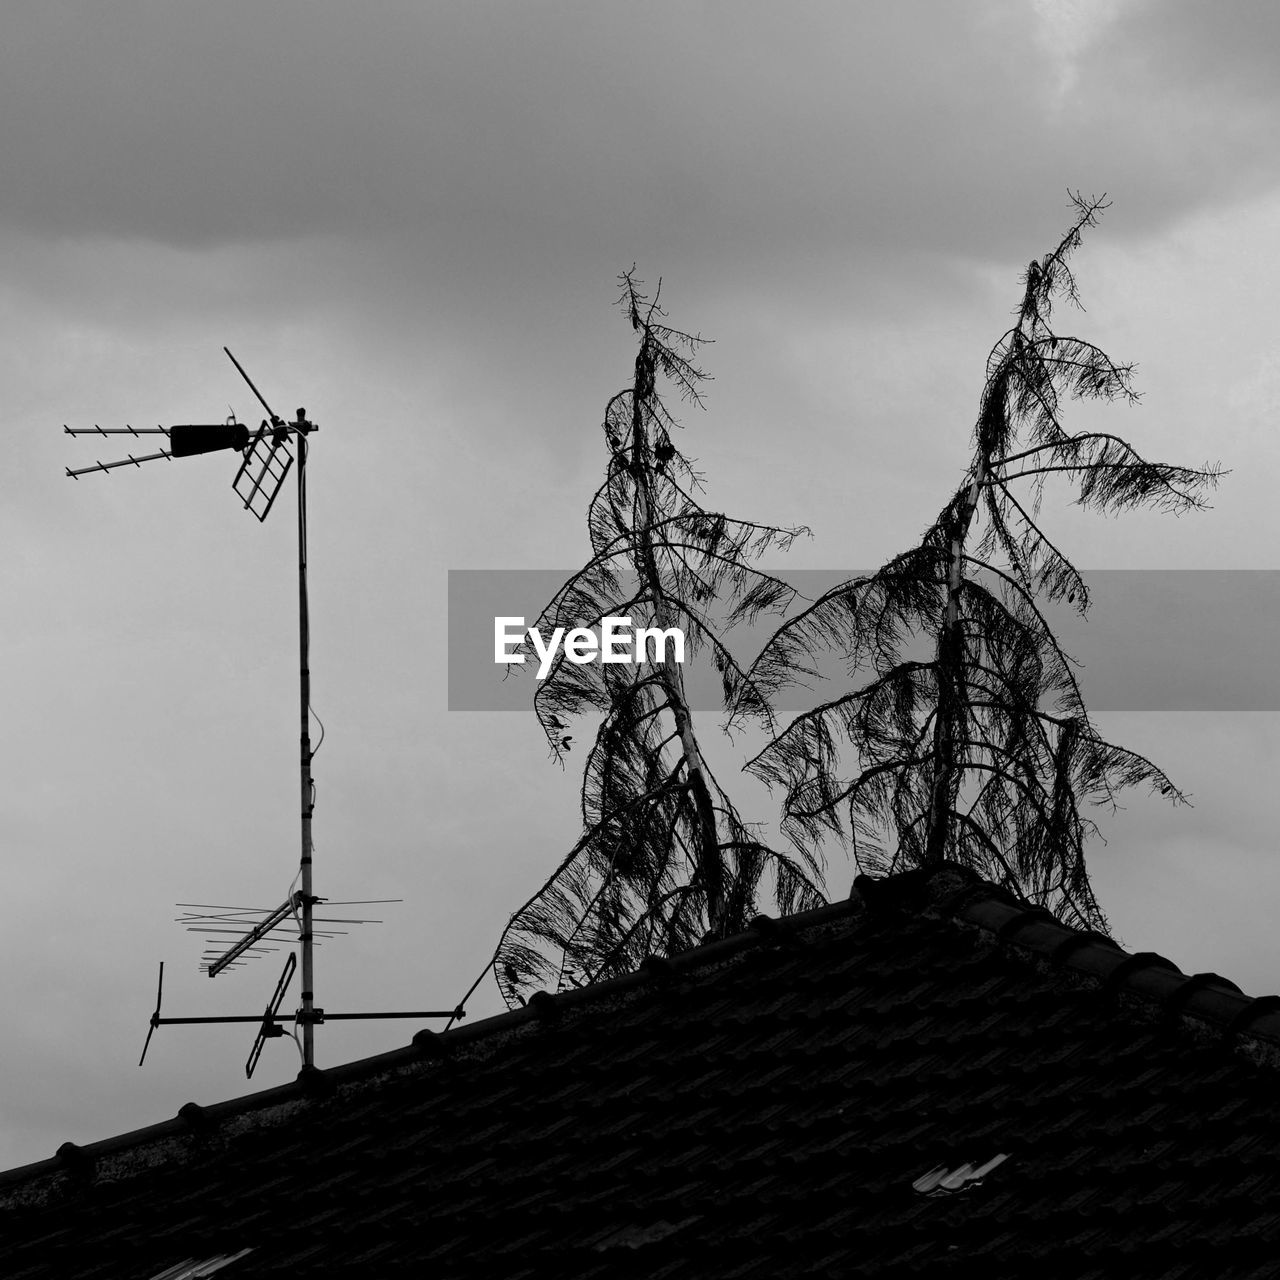 black and white, monochrome, architecture, sky, wind, monochrome photography, built structure, television antenna, roof, nature, low angle view, no people, antenna, building exterior, cloud, building, television aerial, windmill, outdoors, black, technology, house, weather vane, history, environment, darkness, day, communication, the past, silhouette